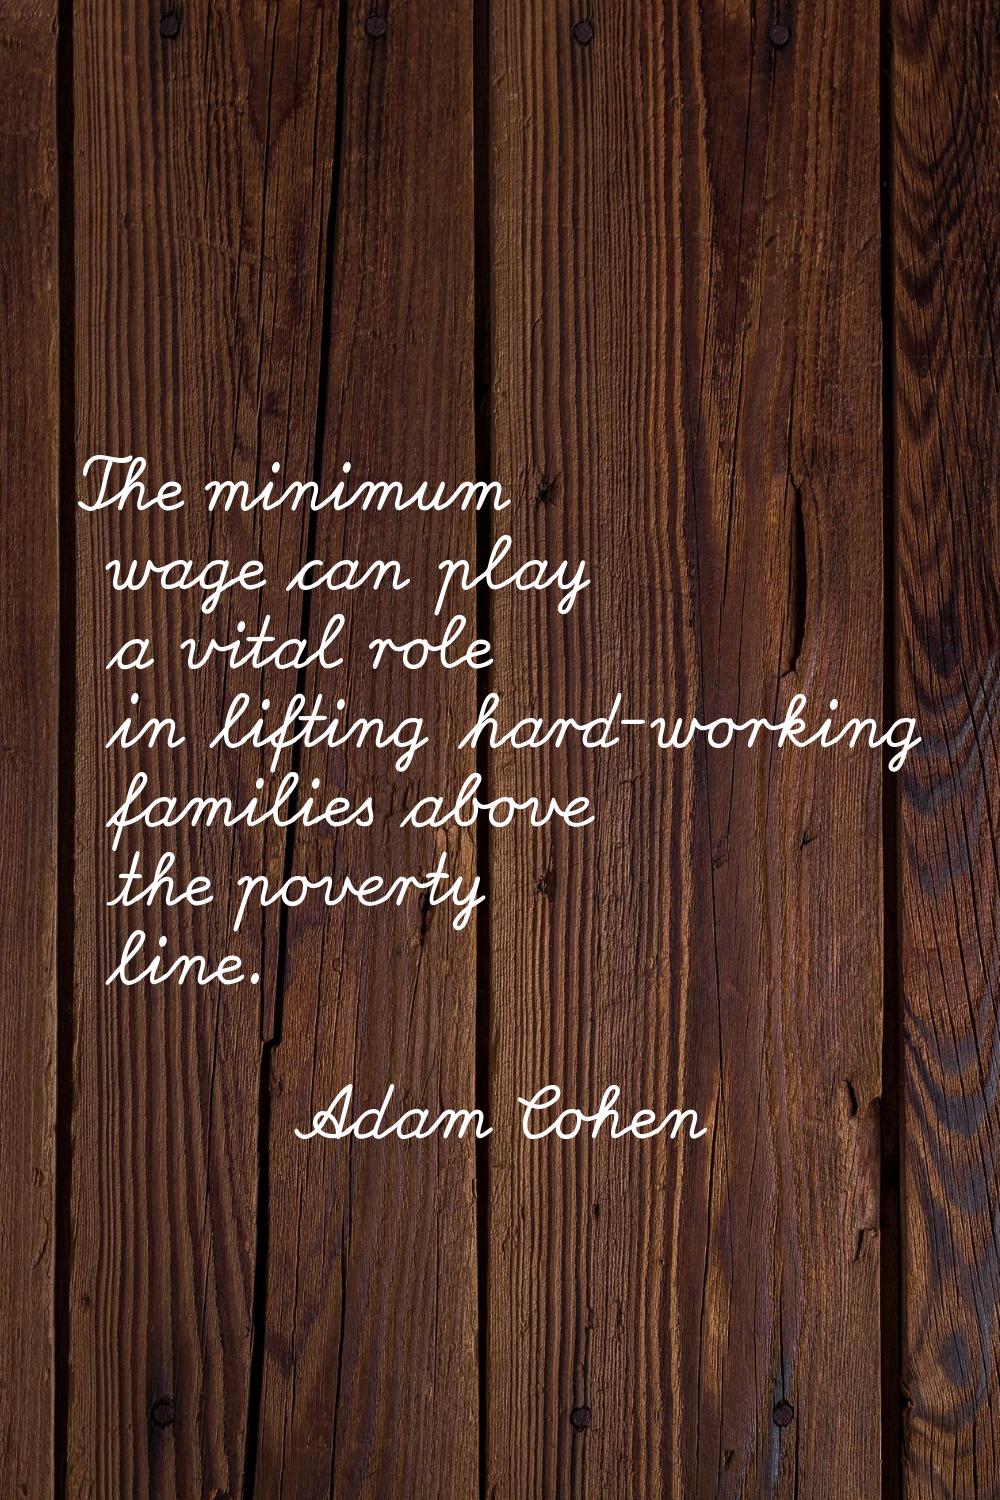 The minimum wage can play a vital role in lifting hard-working families above the poverty line.